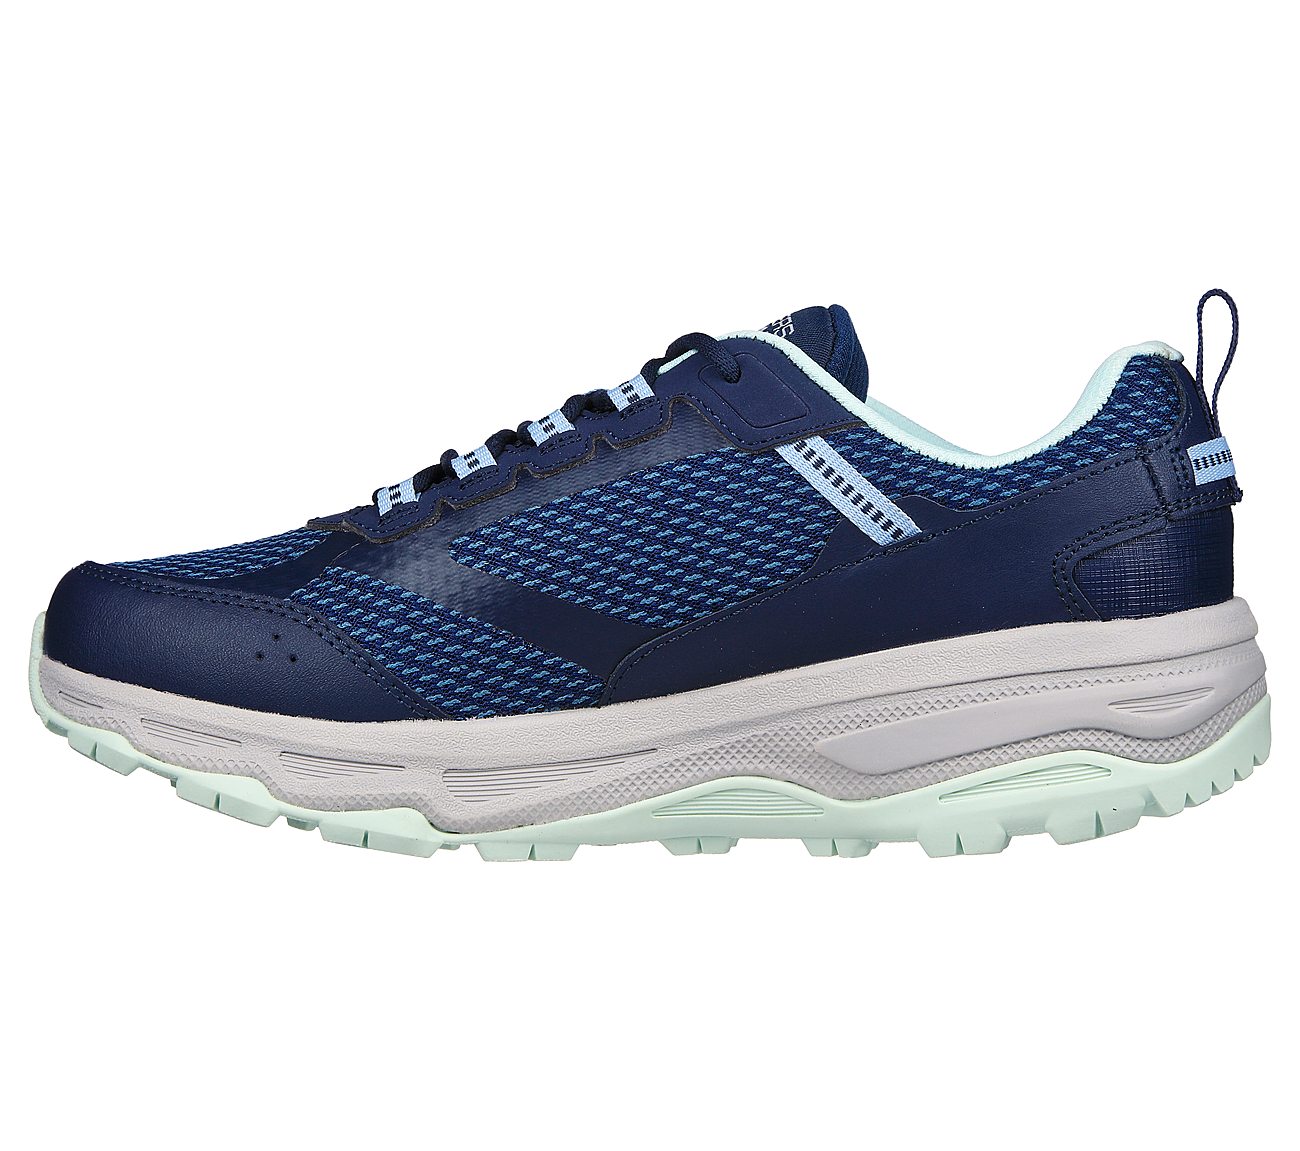 GO RUN TRAIL ALTITUDE, NAVY/TURQUOISE Footwear Left View